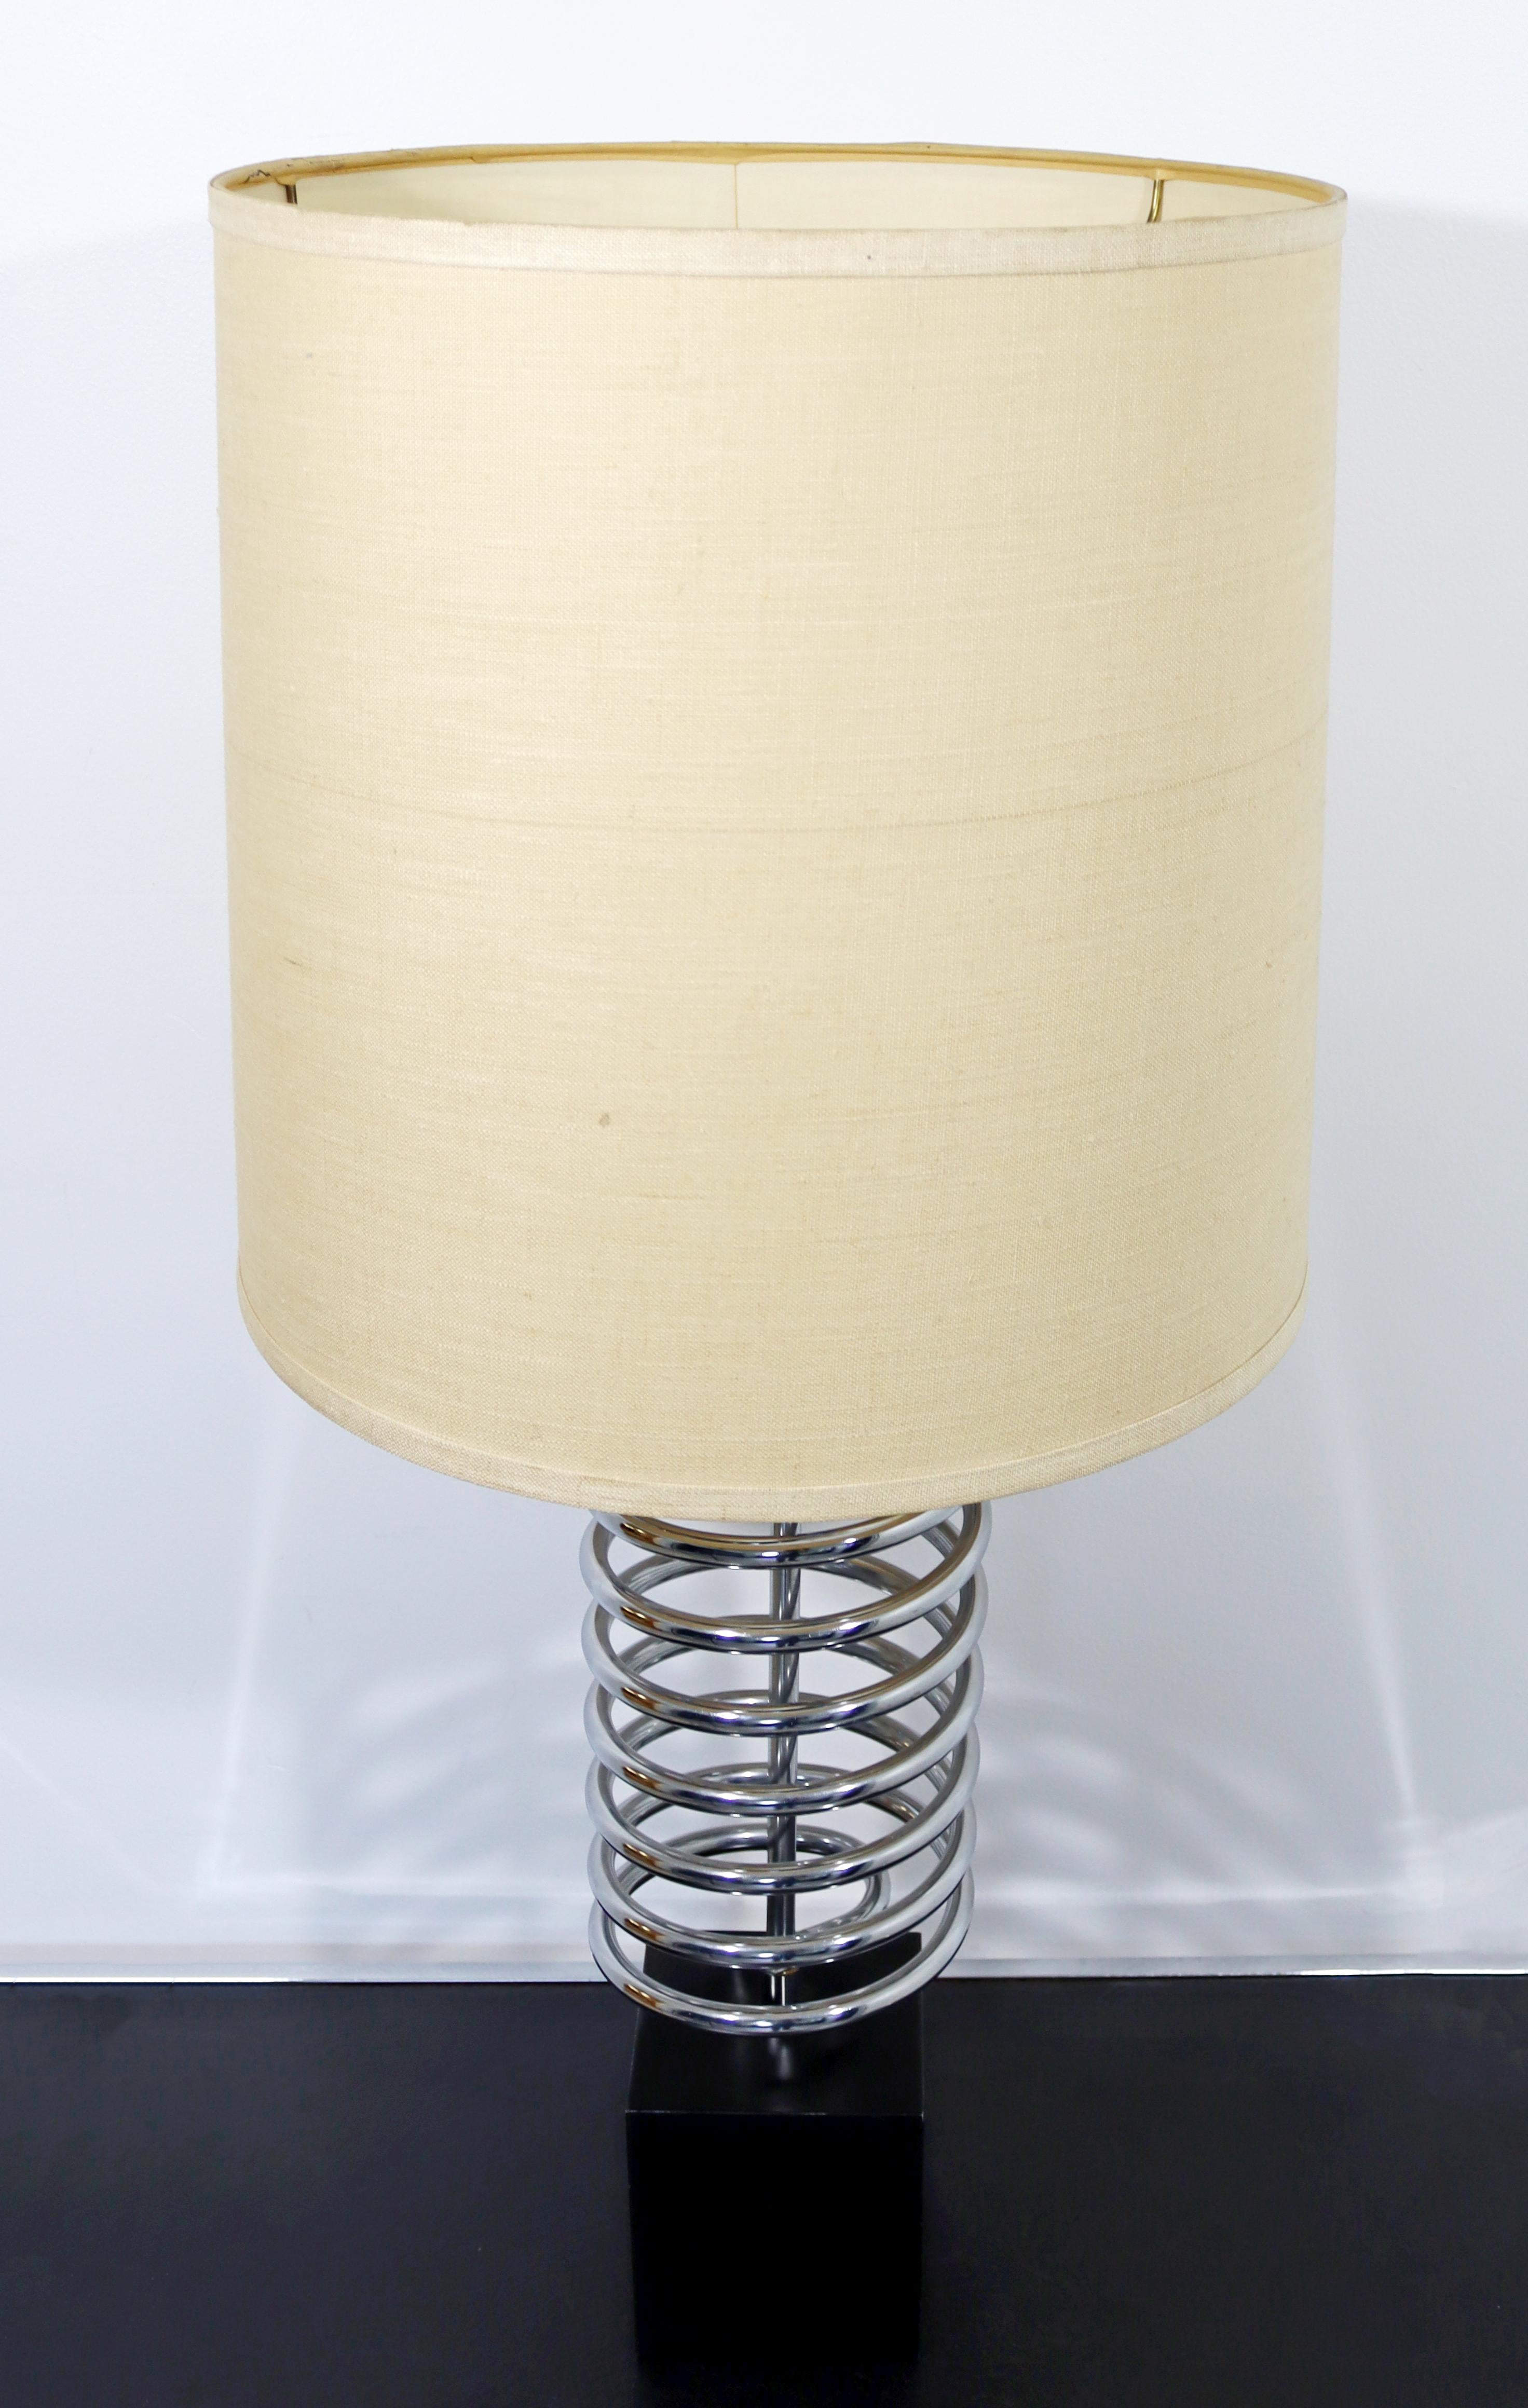 For your consideration is a fantastic, chrome spring table lamp, with original shade and finial, by Laurel Lamp Co, circa the 1970s. In very good vintage condition. The dimensions of the lamp are 7